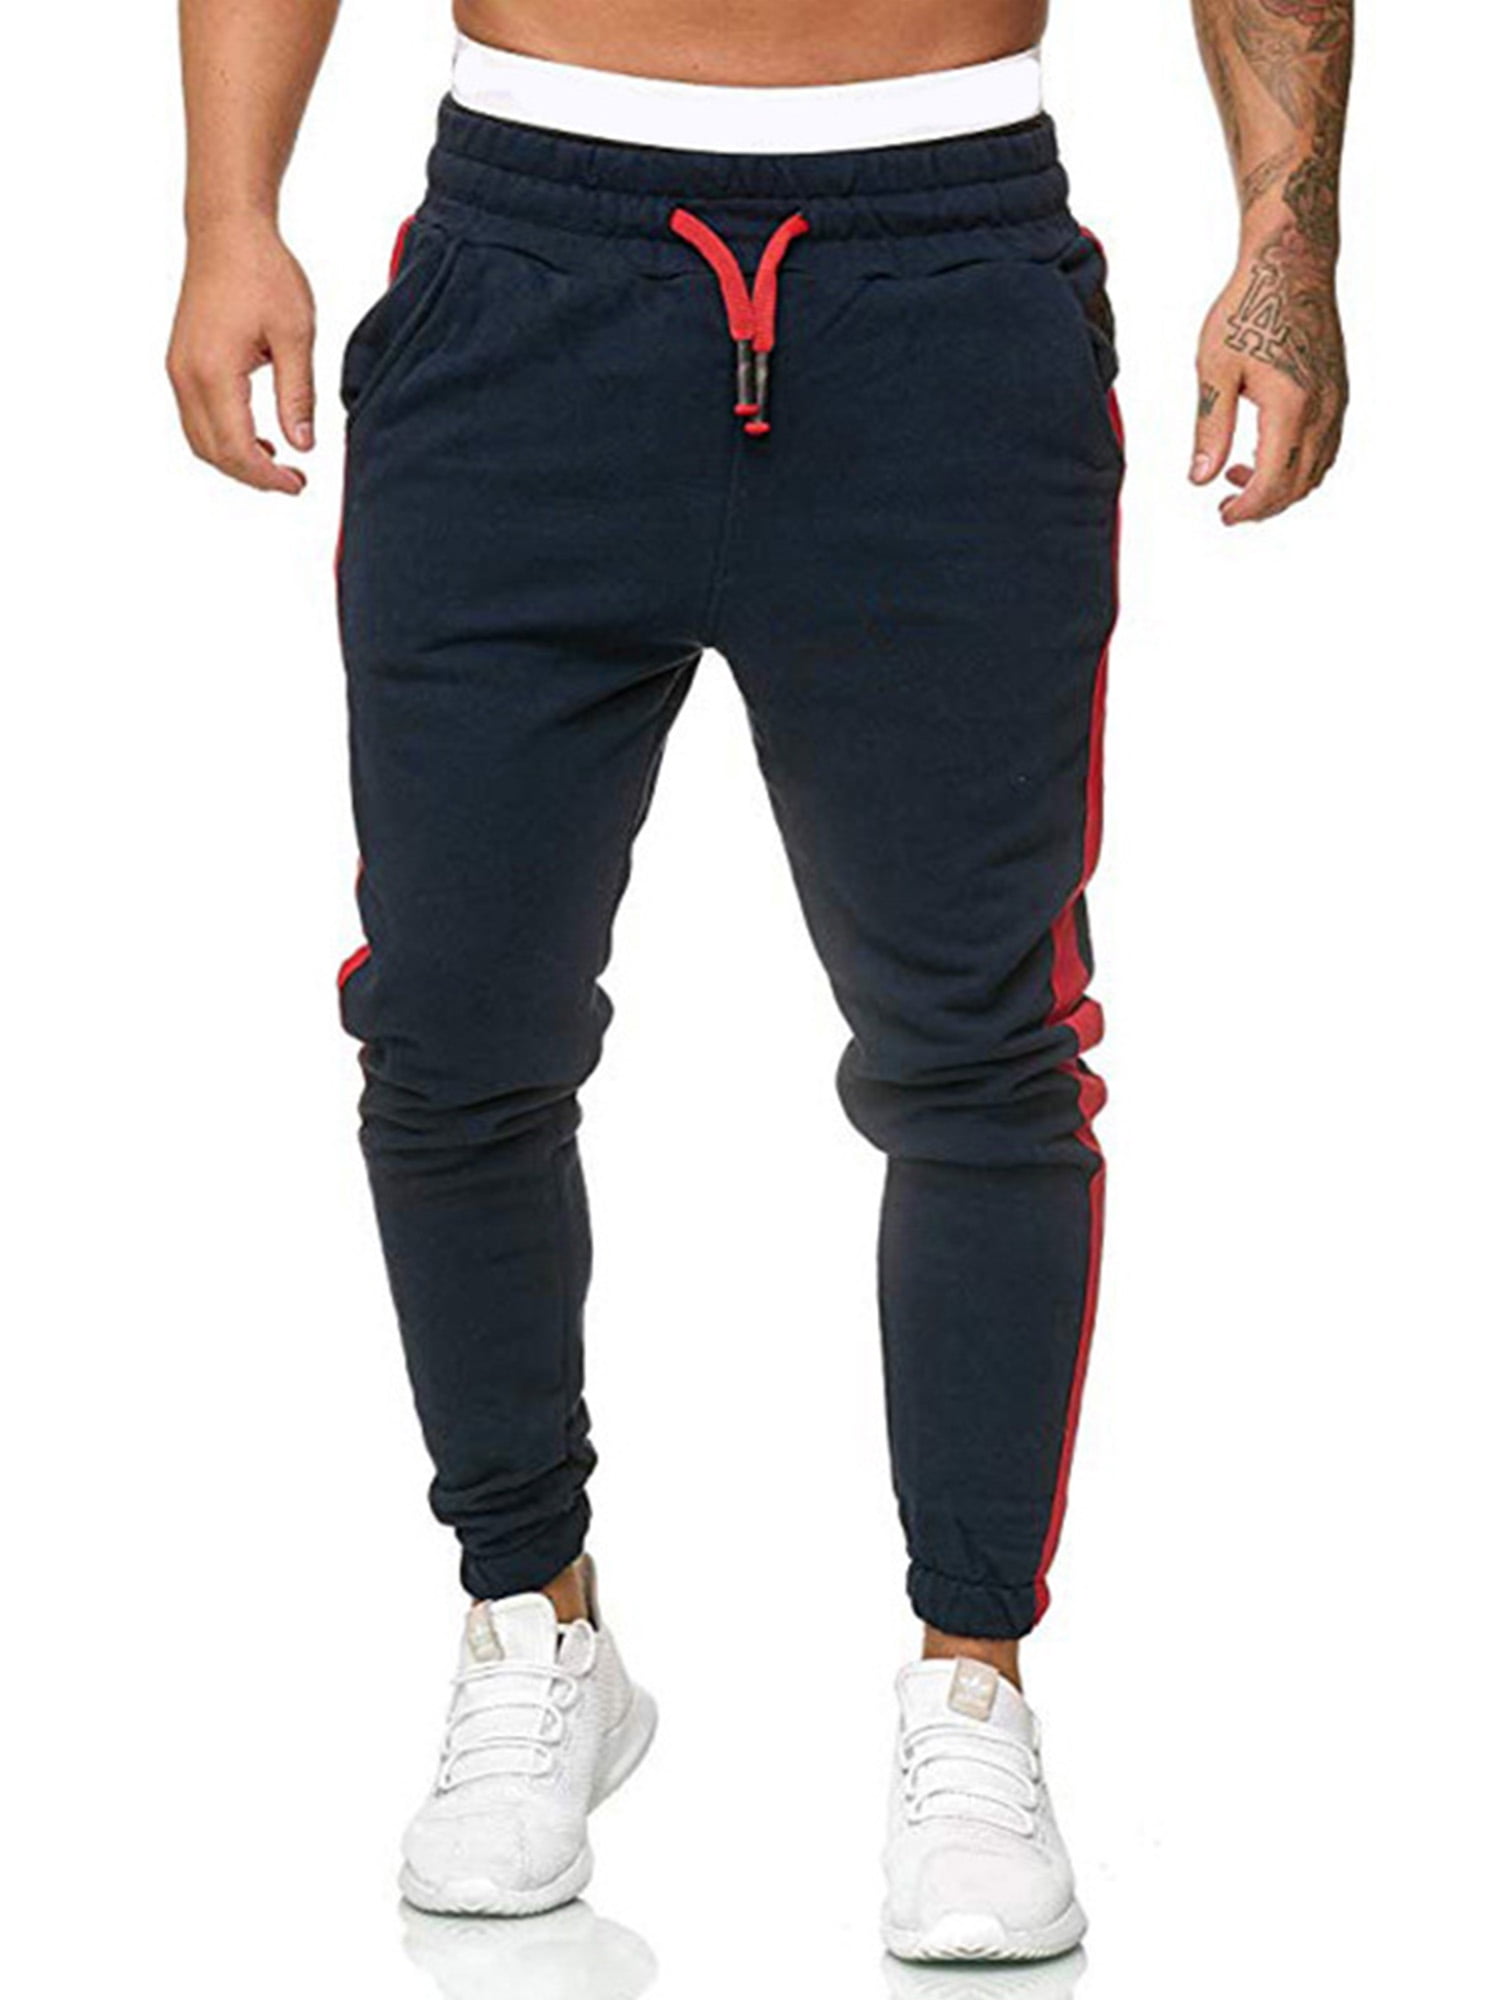 Causal Slim Fit Running Trousers Tracksuit Jogging Bottoms with Double Pockets Funnygals Mens Gym Joggers Sweatpants